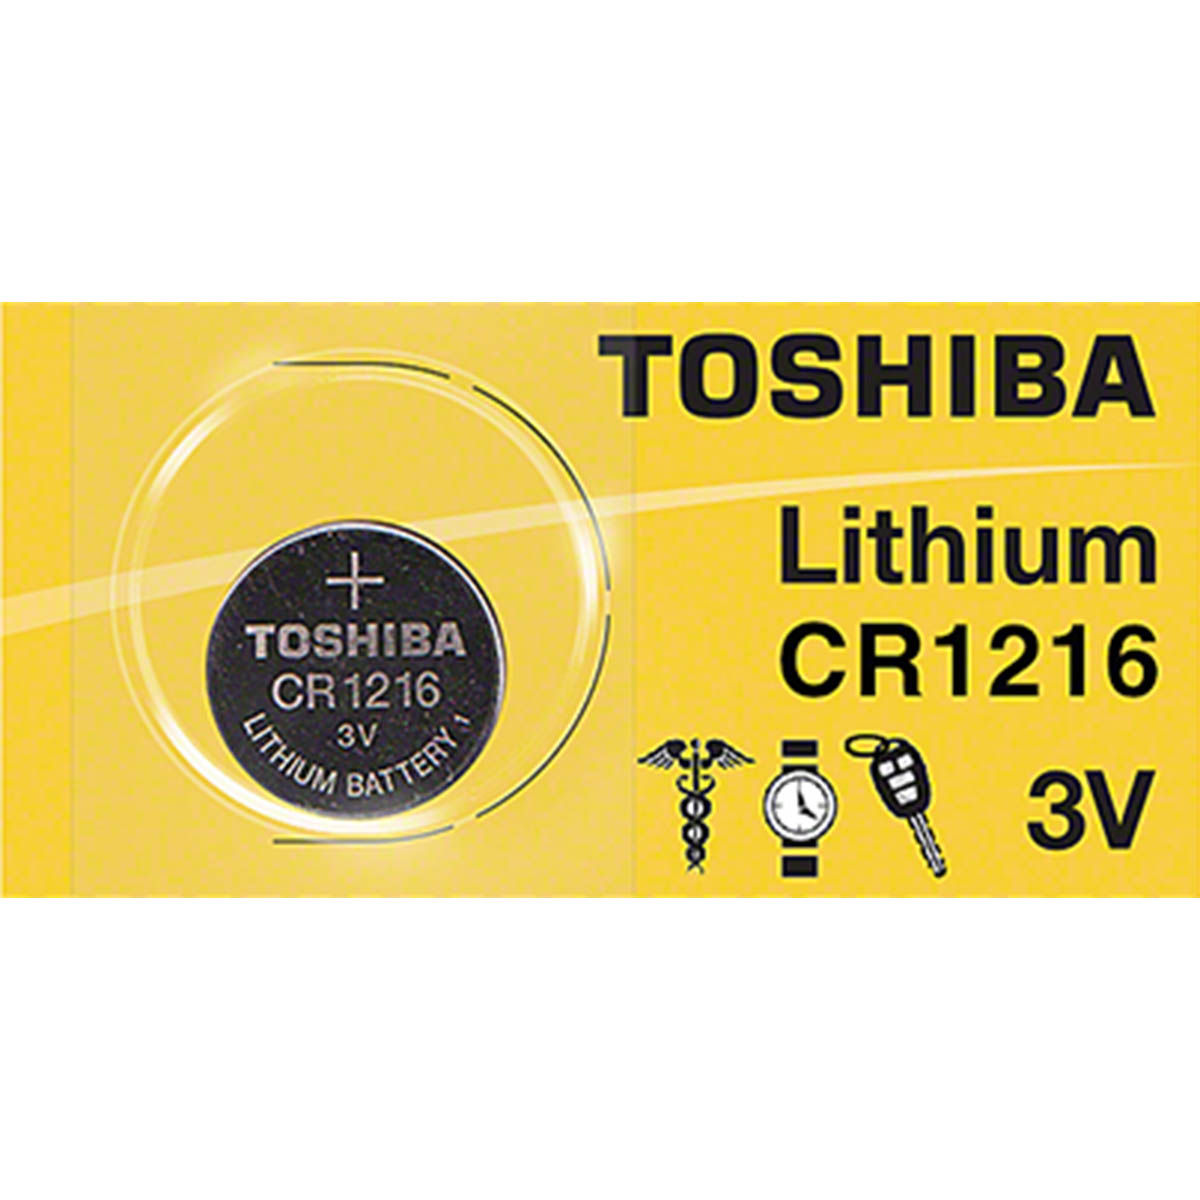 Toshiba CR1216 3V Lithium Coin Cell Battery Pack of 5